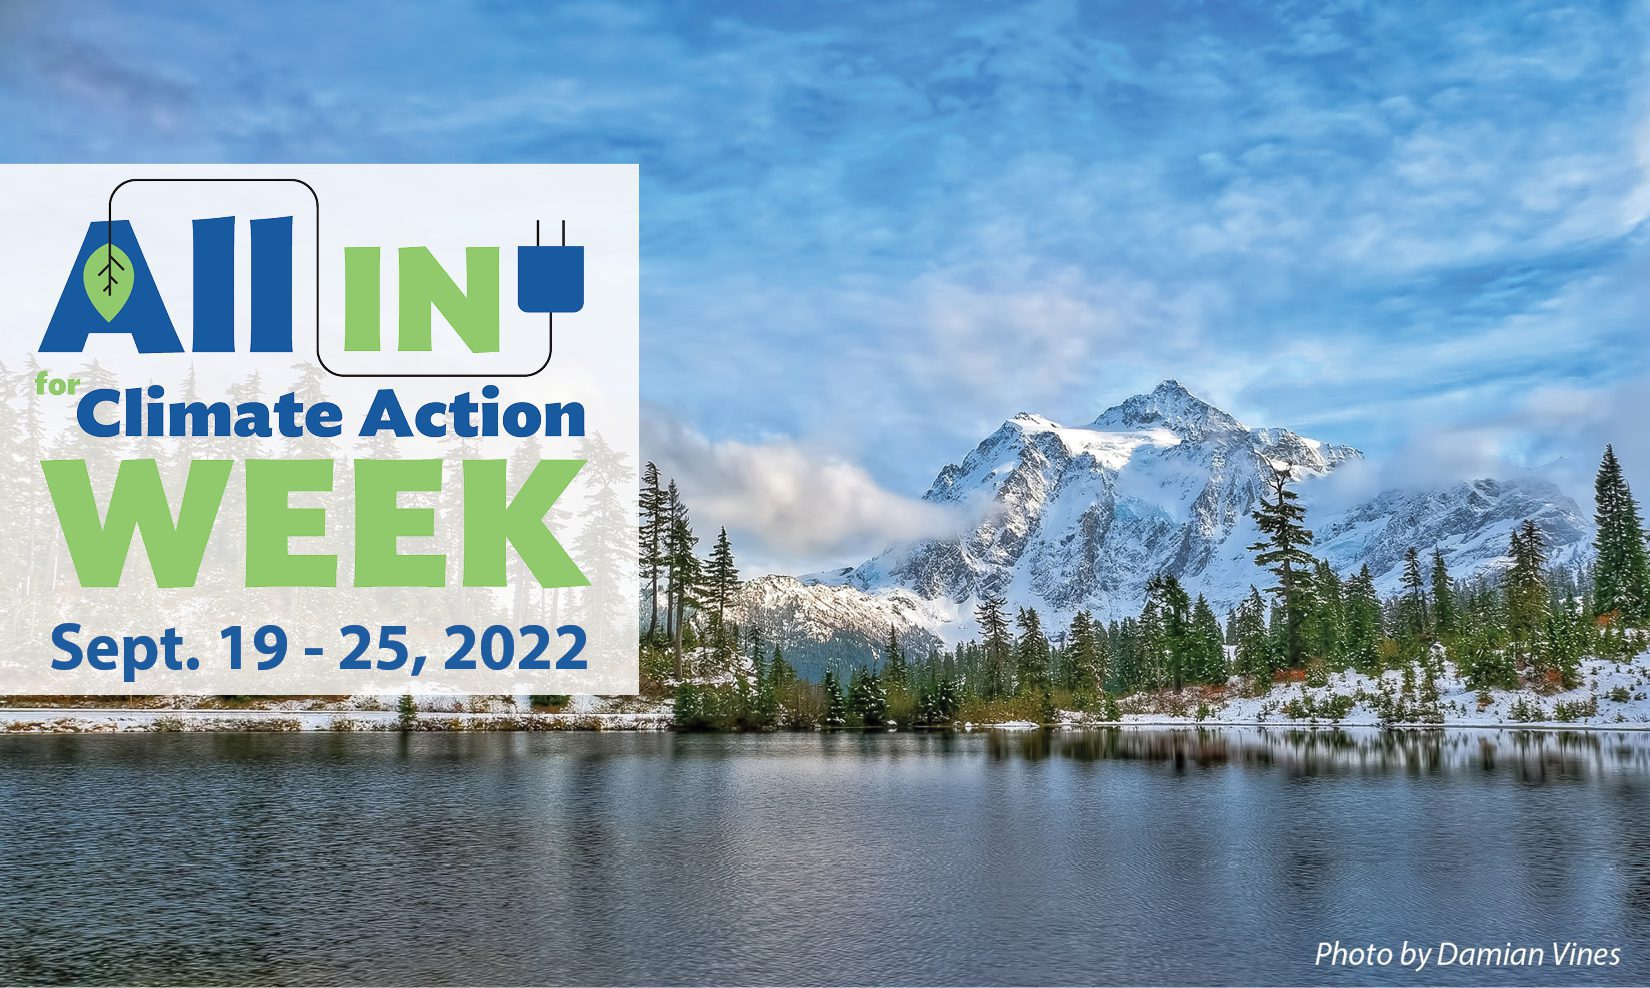 Image of Mt. Shuksan from Picture Lake with Climate Action Week logo